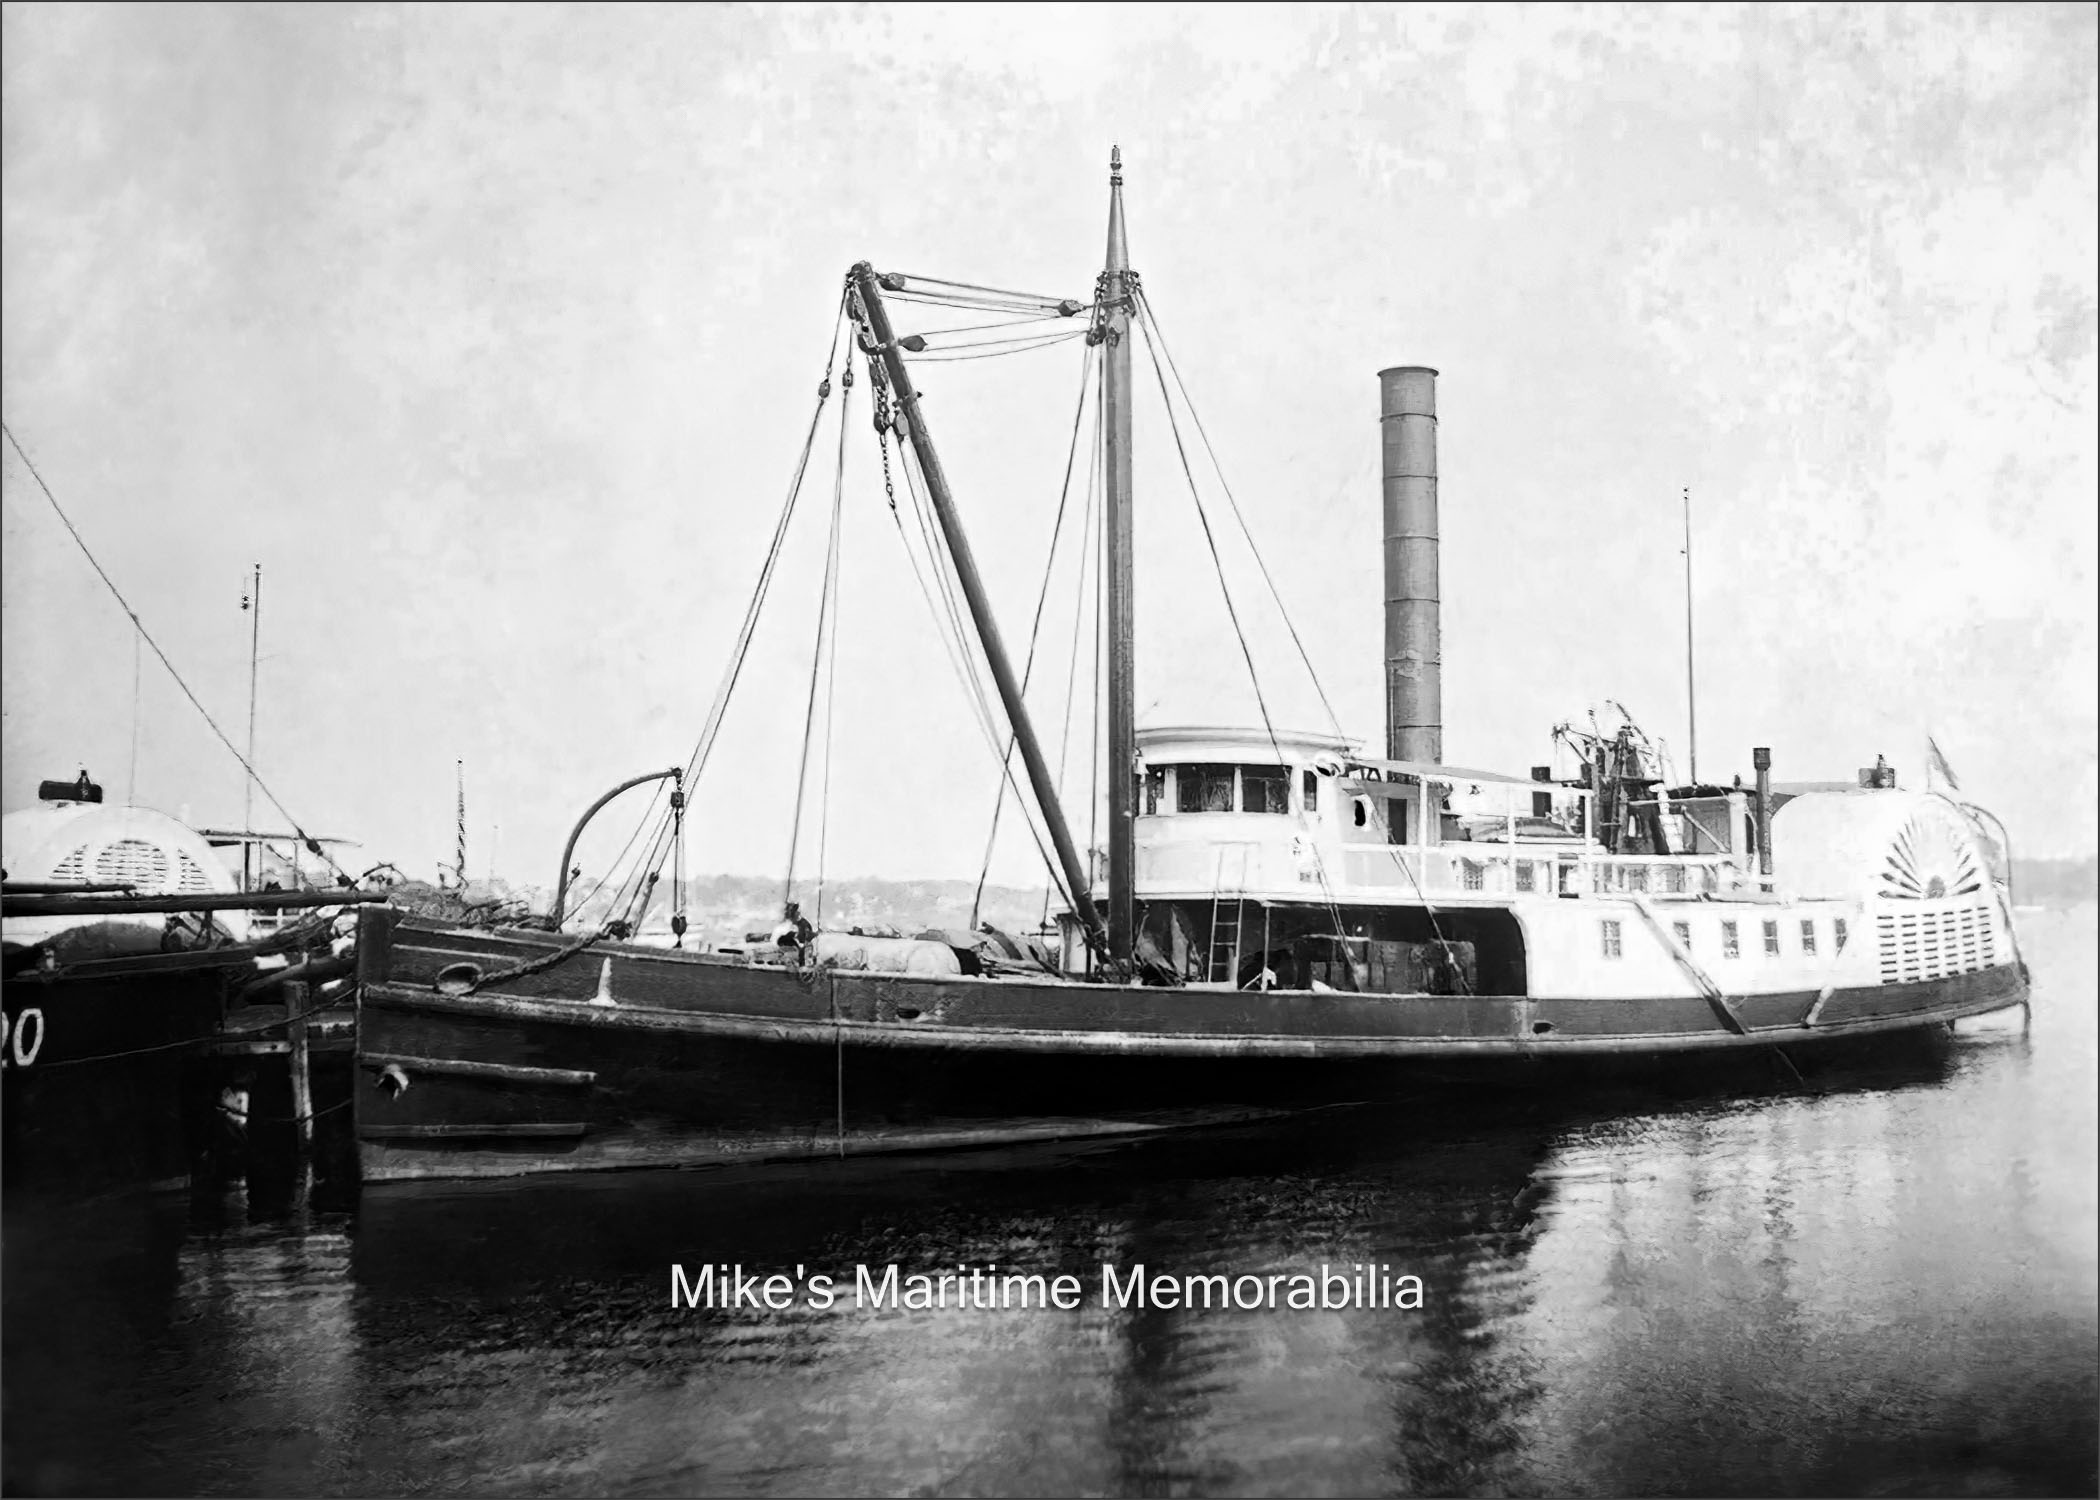 MISTLETOE, New York, NY – 1899 The "MISTLETOE" was a sidewheel steamboat built in 1872 at Chester, Pennsylvania. At the time of this photo, she was owned by the United States Light-House Establishment and operated as a Light House Tender bringing supplies to light houses. She was later sold and at some point began taking parties of anglers from Manhattan's Battery to the fishing grounds. On May 5, 1924 she caught fire while underway to the fishing grounds off Far Rockaway, burned to the waterline and sank. Captain Dan Gully, who owned the "MISTLETOE", was in command of the vessel at the time with 74 passengers aboard, all of whom were safely transferred to other fishing vessels before she went down. Known by local fishermen as "The East Wreck", she still produces various types of bottom fish to this day.